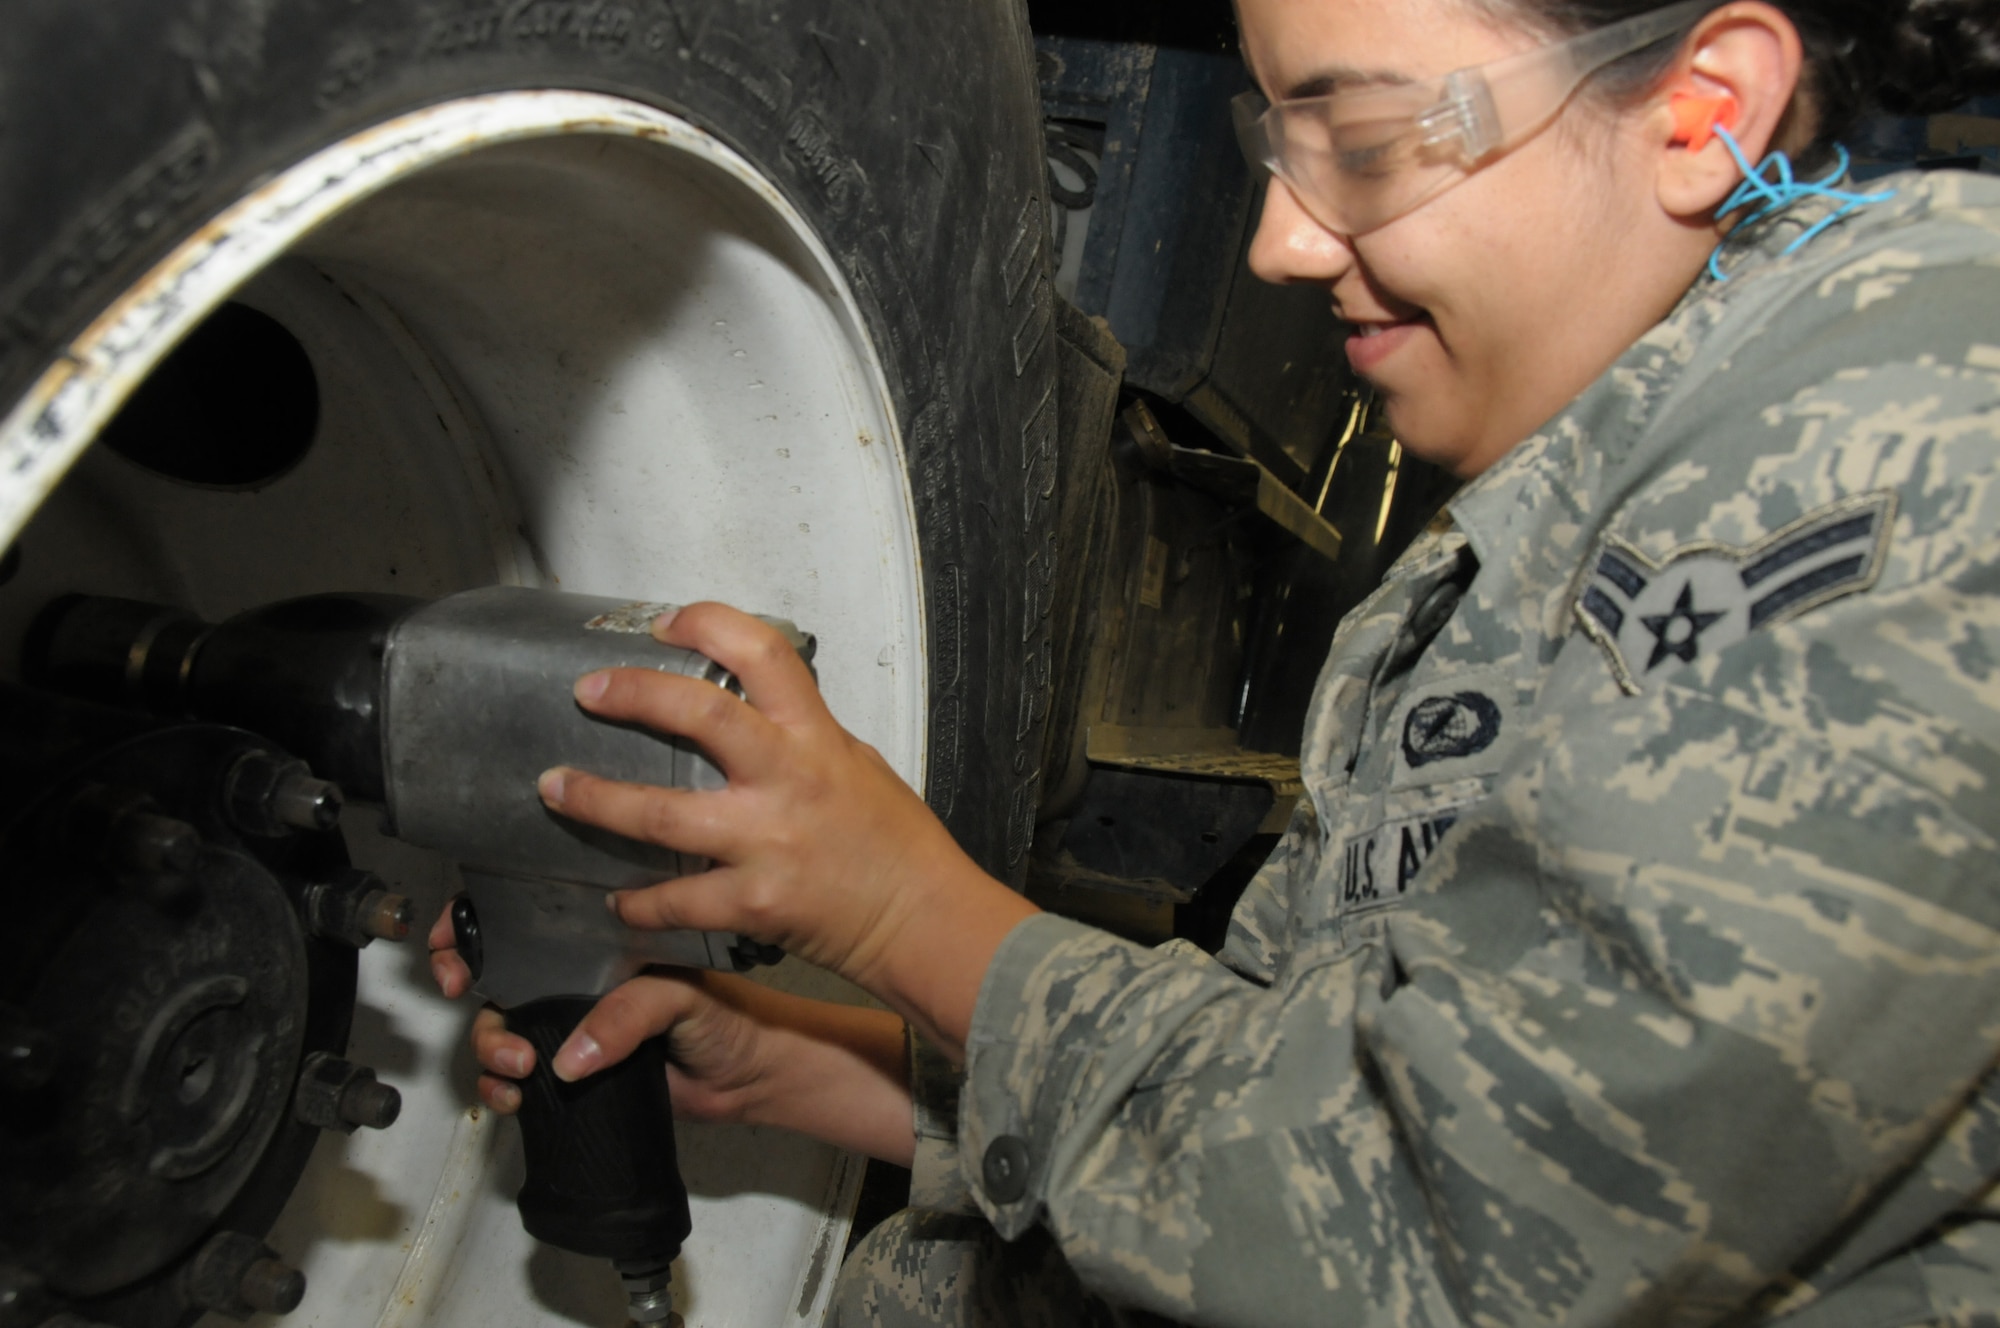 Airman First Class Ashley Ramirez, a journalist with the 146th Airlift Wing Public Affairs, Channel Islands Air National Guard Station, Calif. tries her hand at removing lug nuts from a five-ton vehicle during an annual training deployment at Joint Base Elmendorf-Richardson, Anchorage, Alaska on June 8, 2011. The Air Terminal Operations Squadron, Logistics Readiness Squadron, and the Security Forces Squadron, from the 146AW traveled to Alaska to complete their respective annual training requirements. (Photo by Tech. Sgt. Alex Koenig)